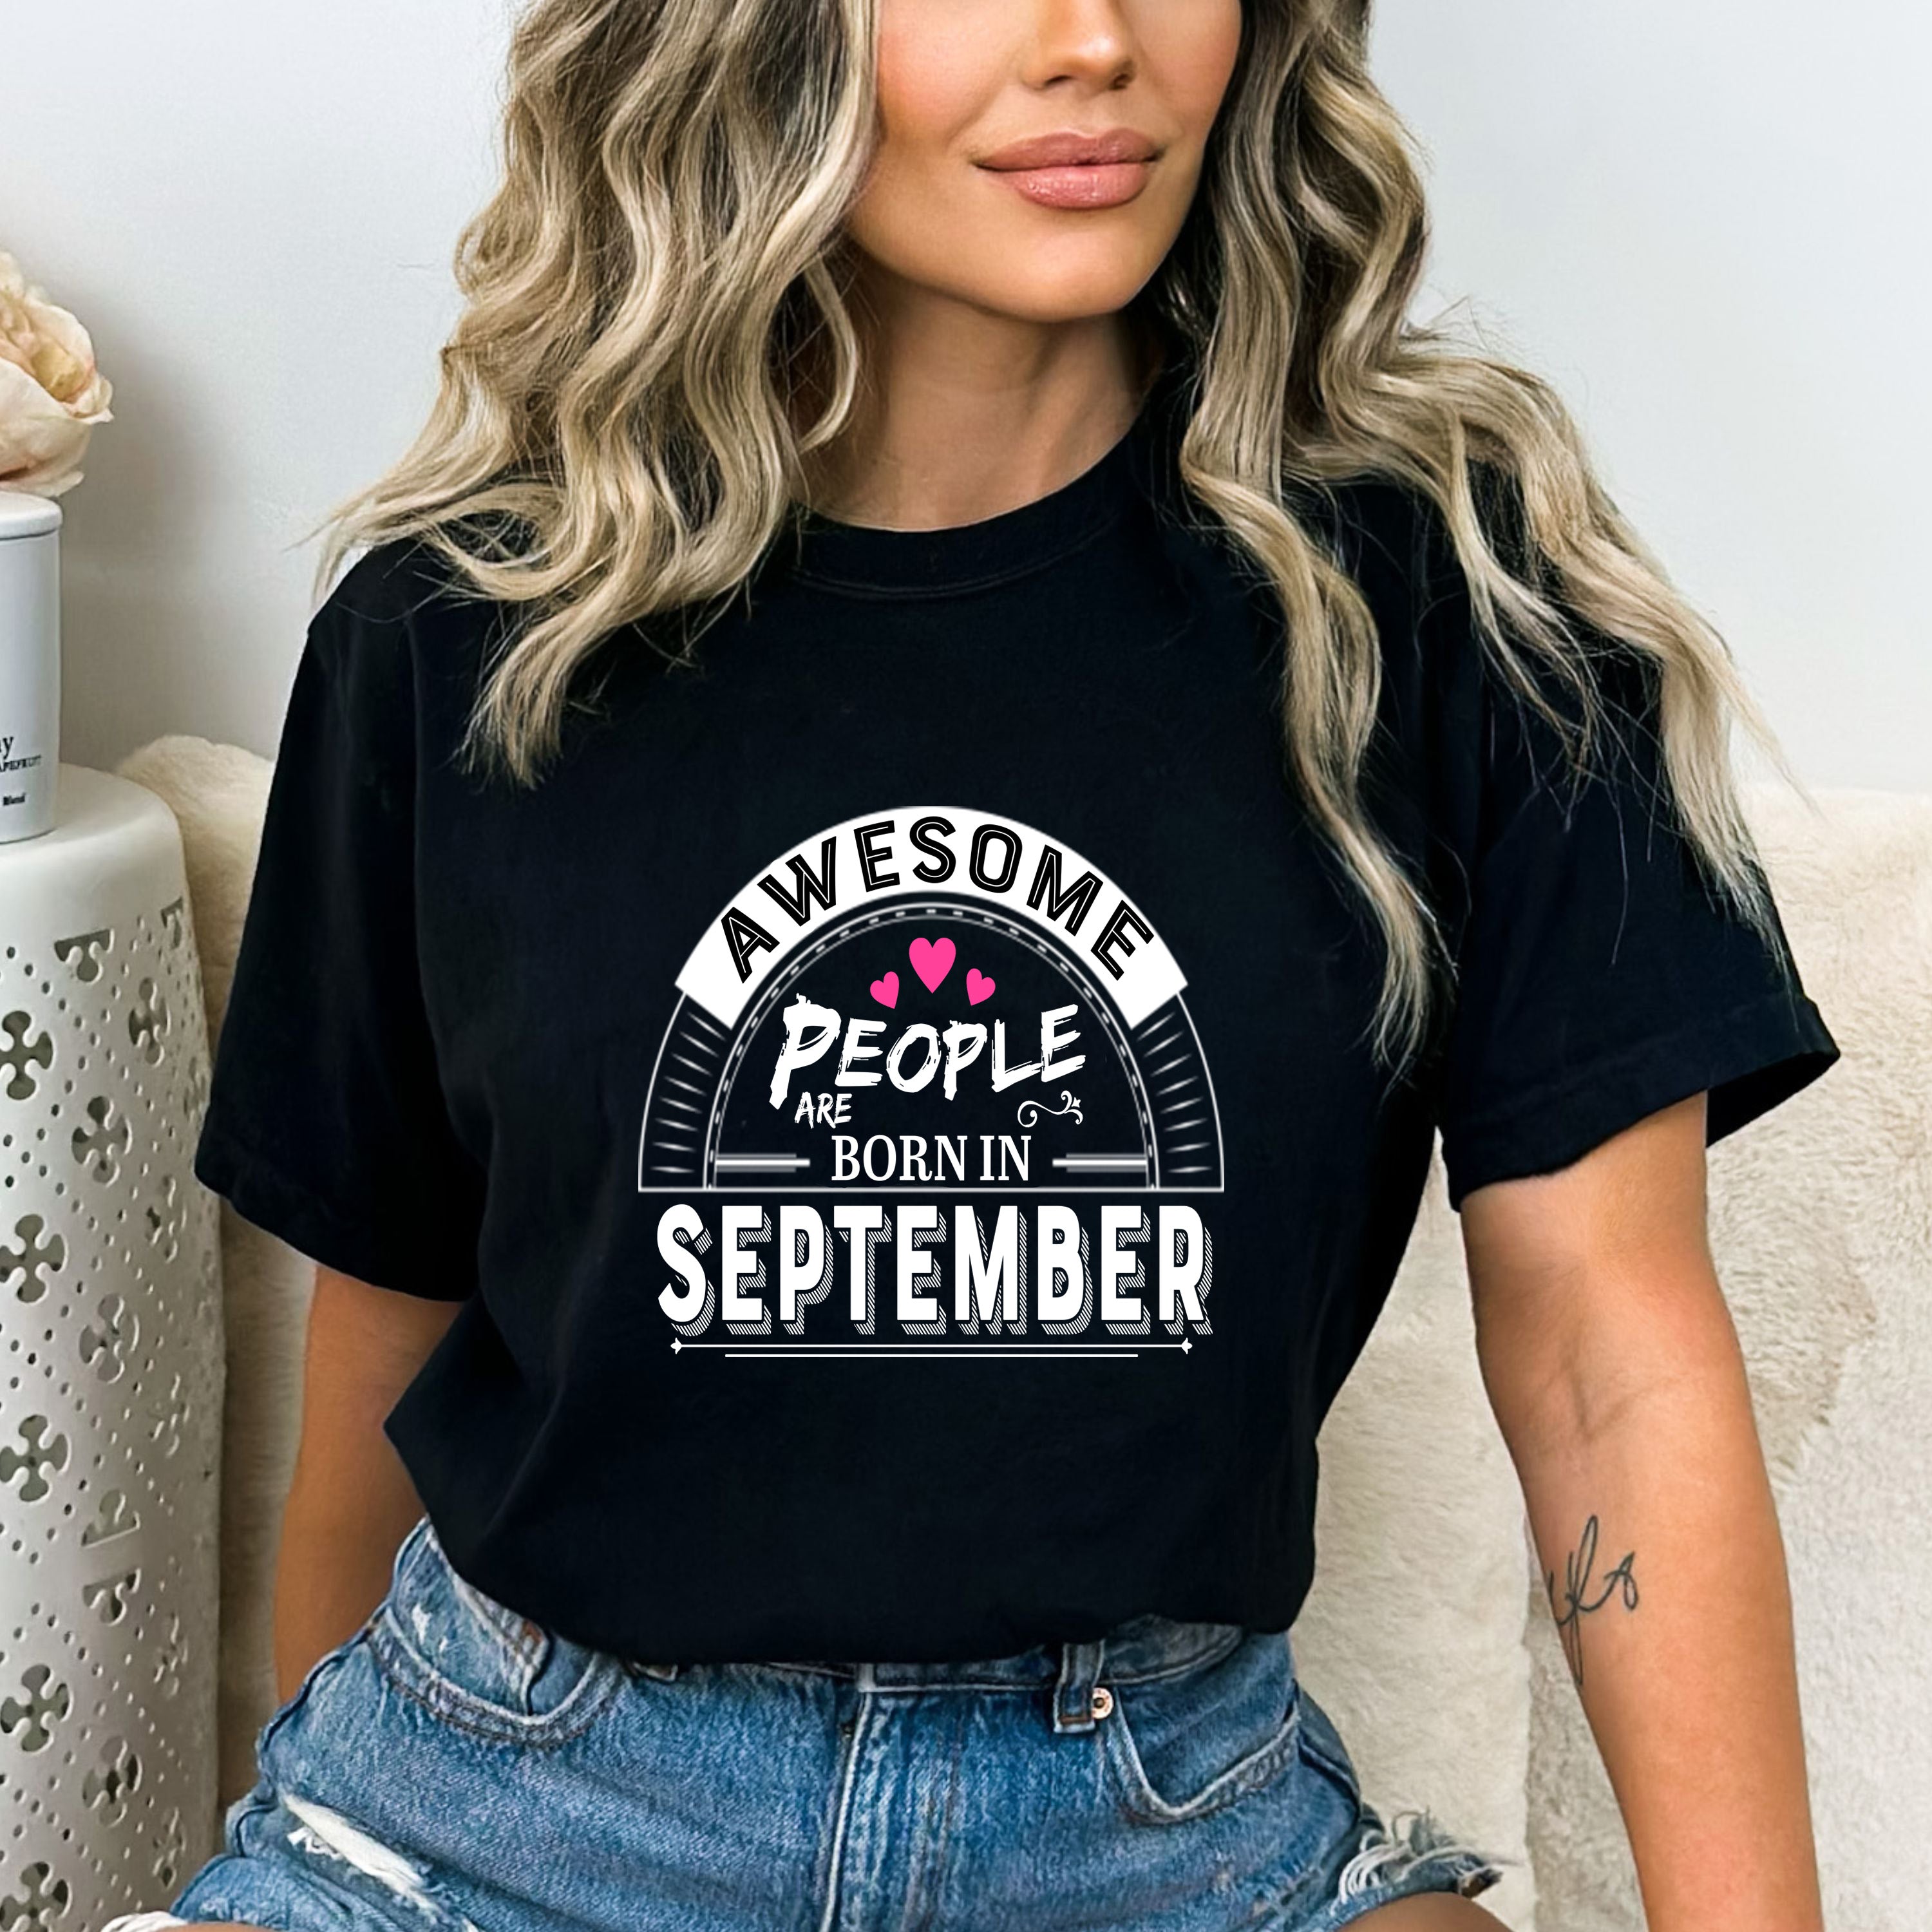 "Awesome People Are Born In September"